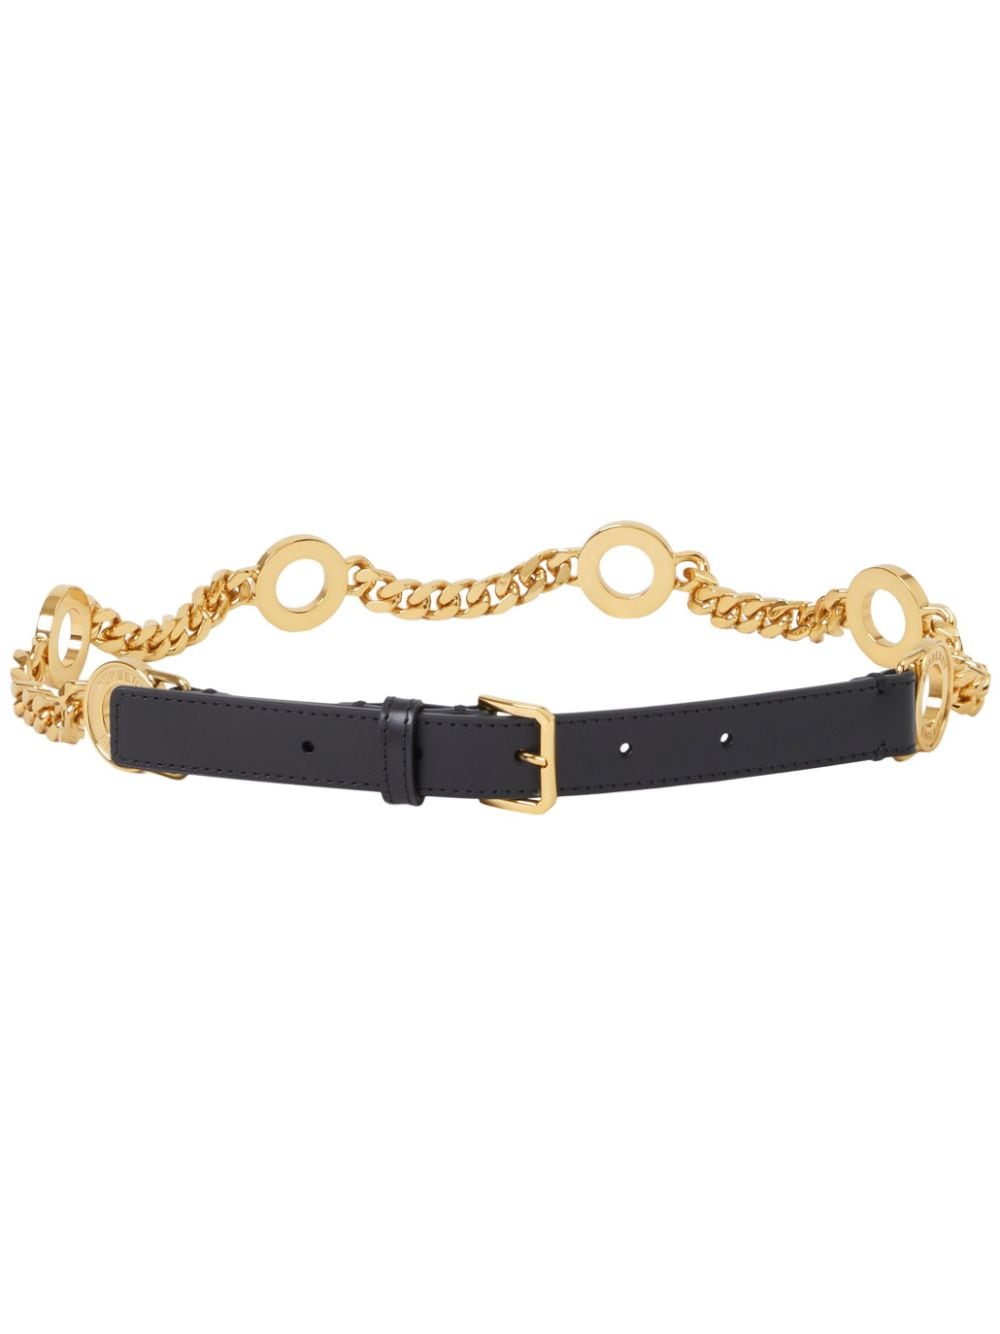 Burberry logo-engraved leather chain belt - Gold von Burberry